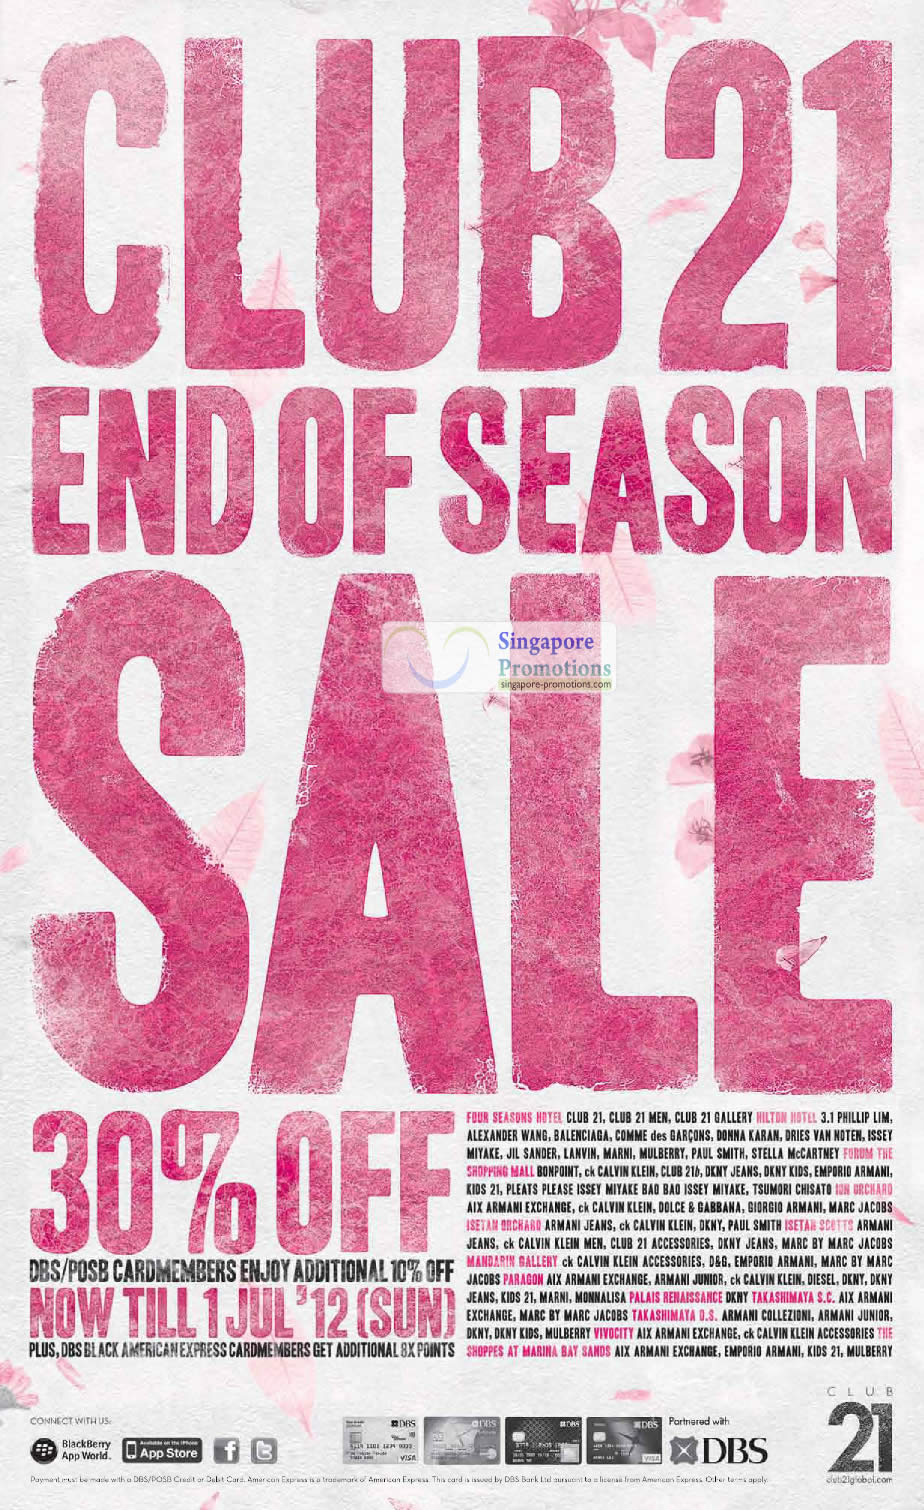 Featured image for Club 21 30% Off End of Season Sale 22 Jun 2012